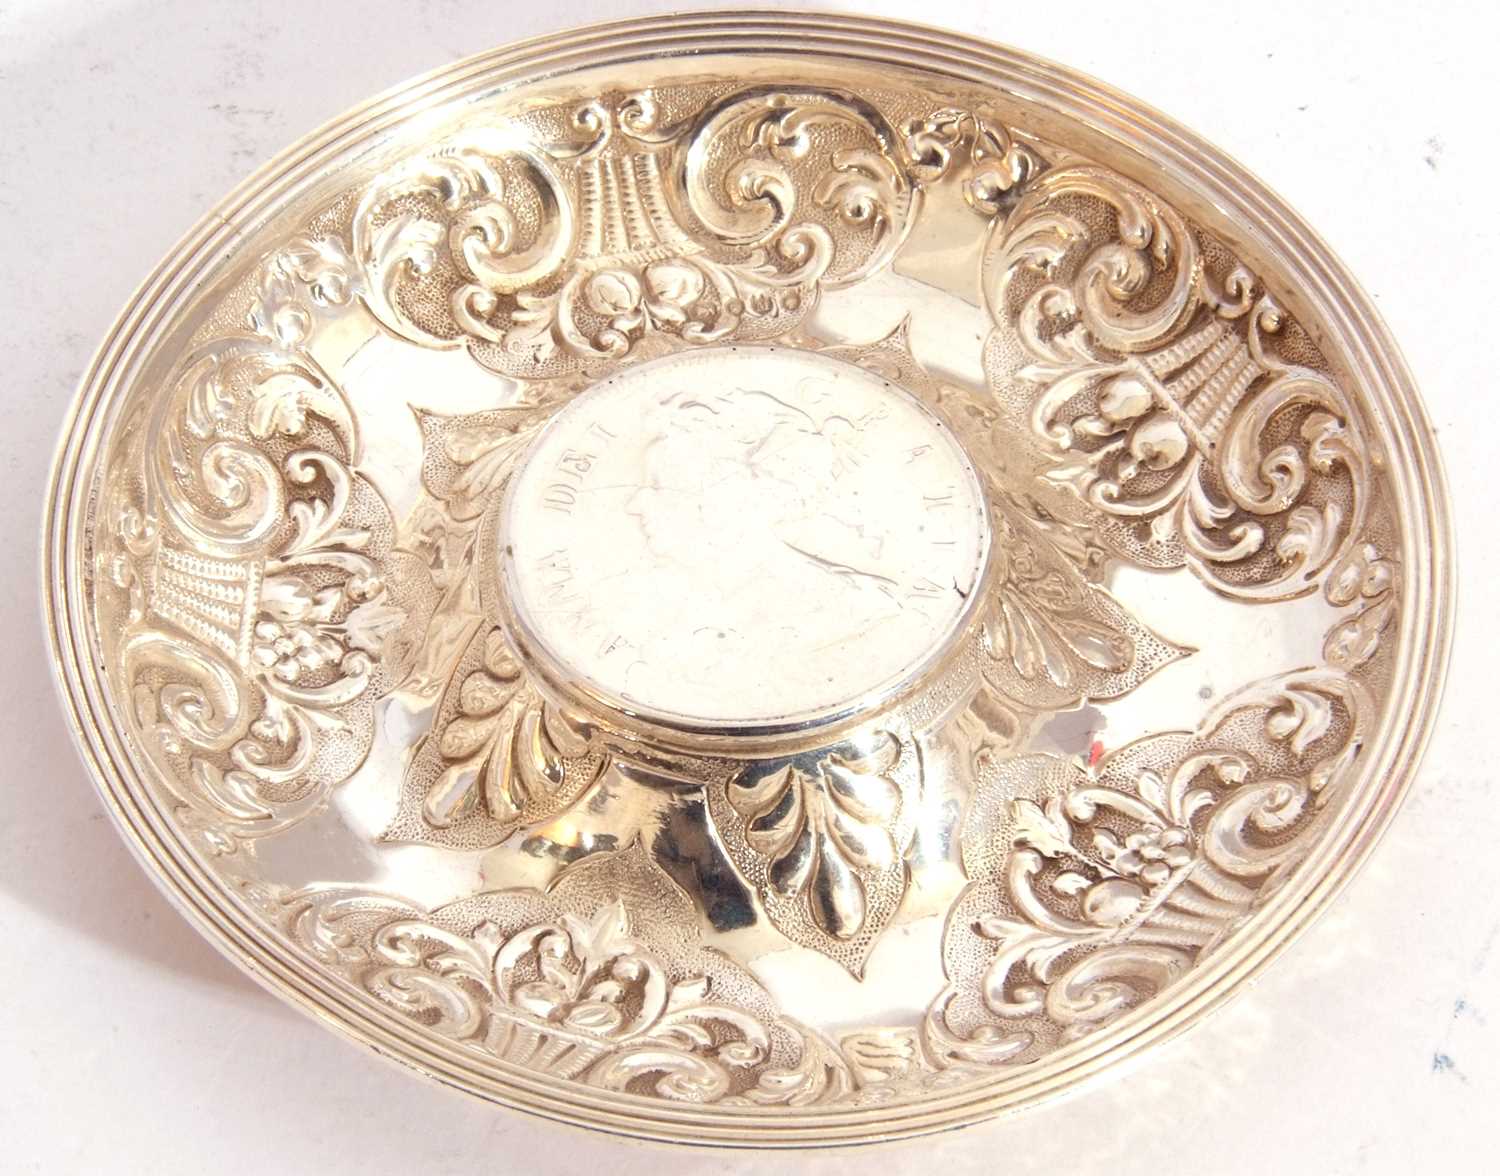 White metal dish of circular form, embossed with baskets of flowers, the centre raised with a 1707